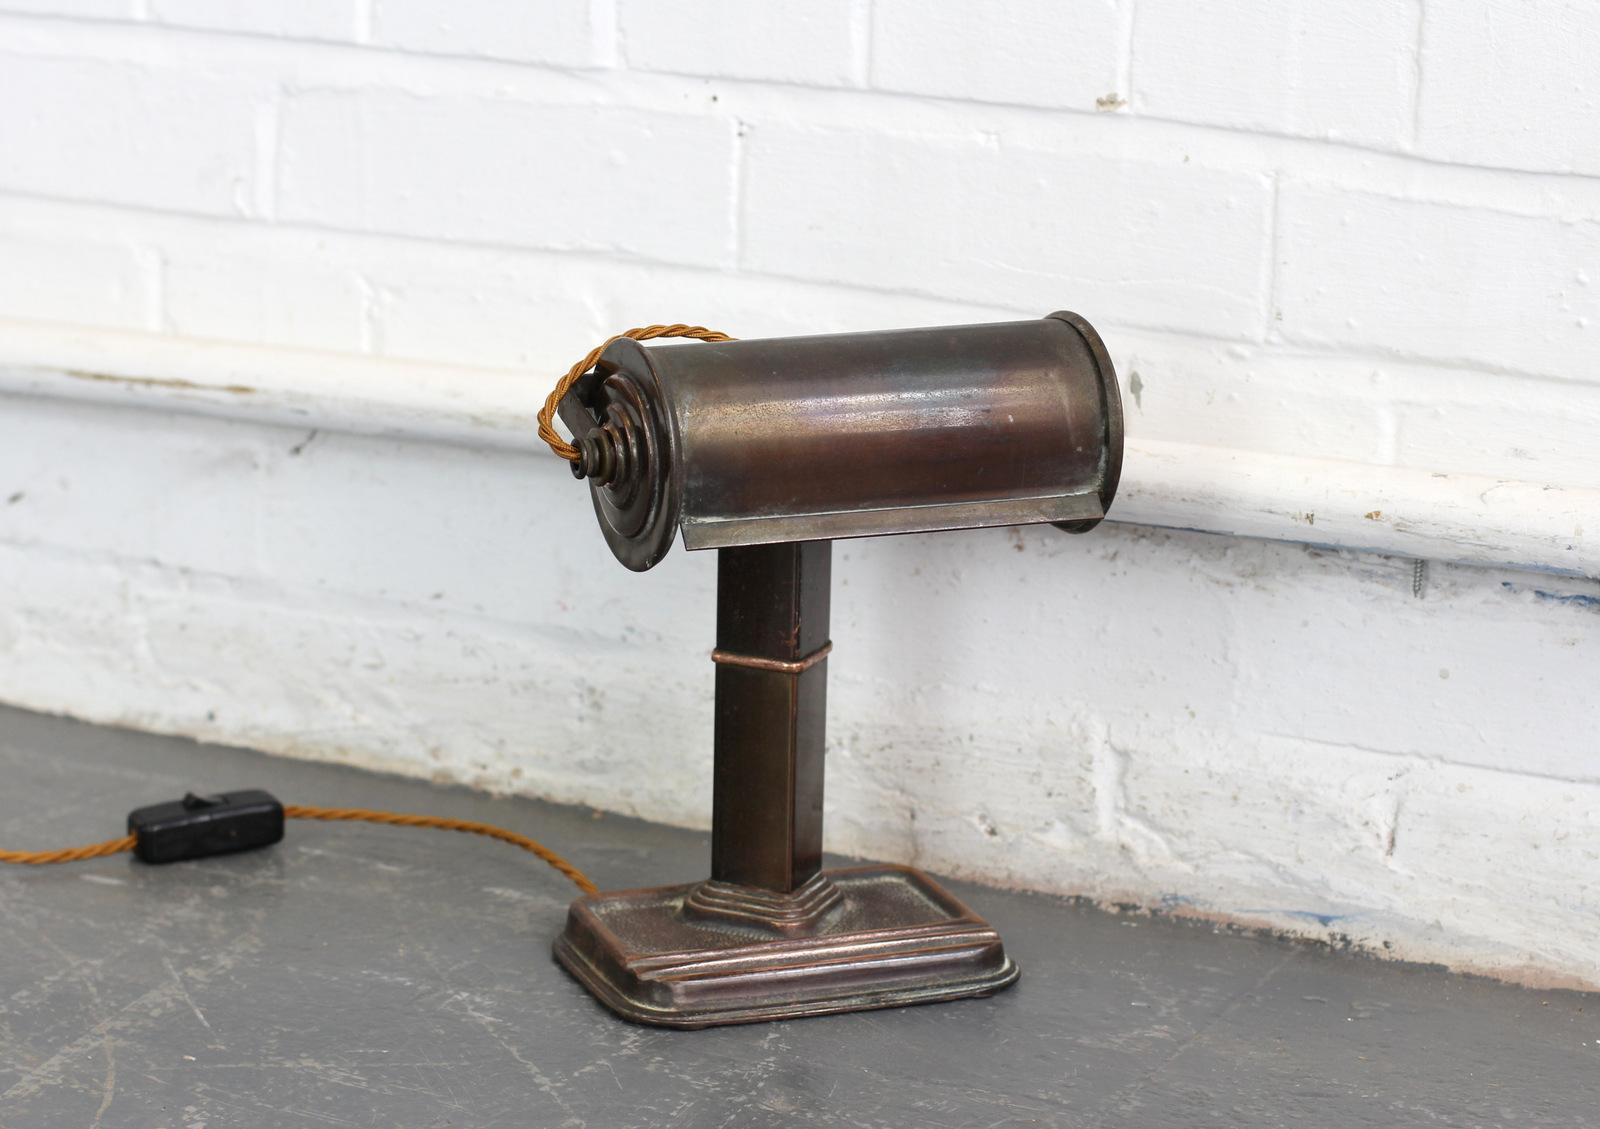 Canadian Art Deco copper desk lamp, circa 1920.

- Copper body and shade
- Cast iron base
- Re wired with gold twist cable
- Takes B22 bayonet fitting bulbs
- Canadian, circa 1920s.
- Measures: 20cm wide x 11cm deep x 26cm tall.

Condition